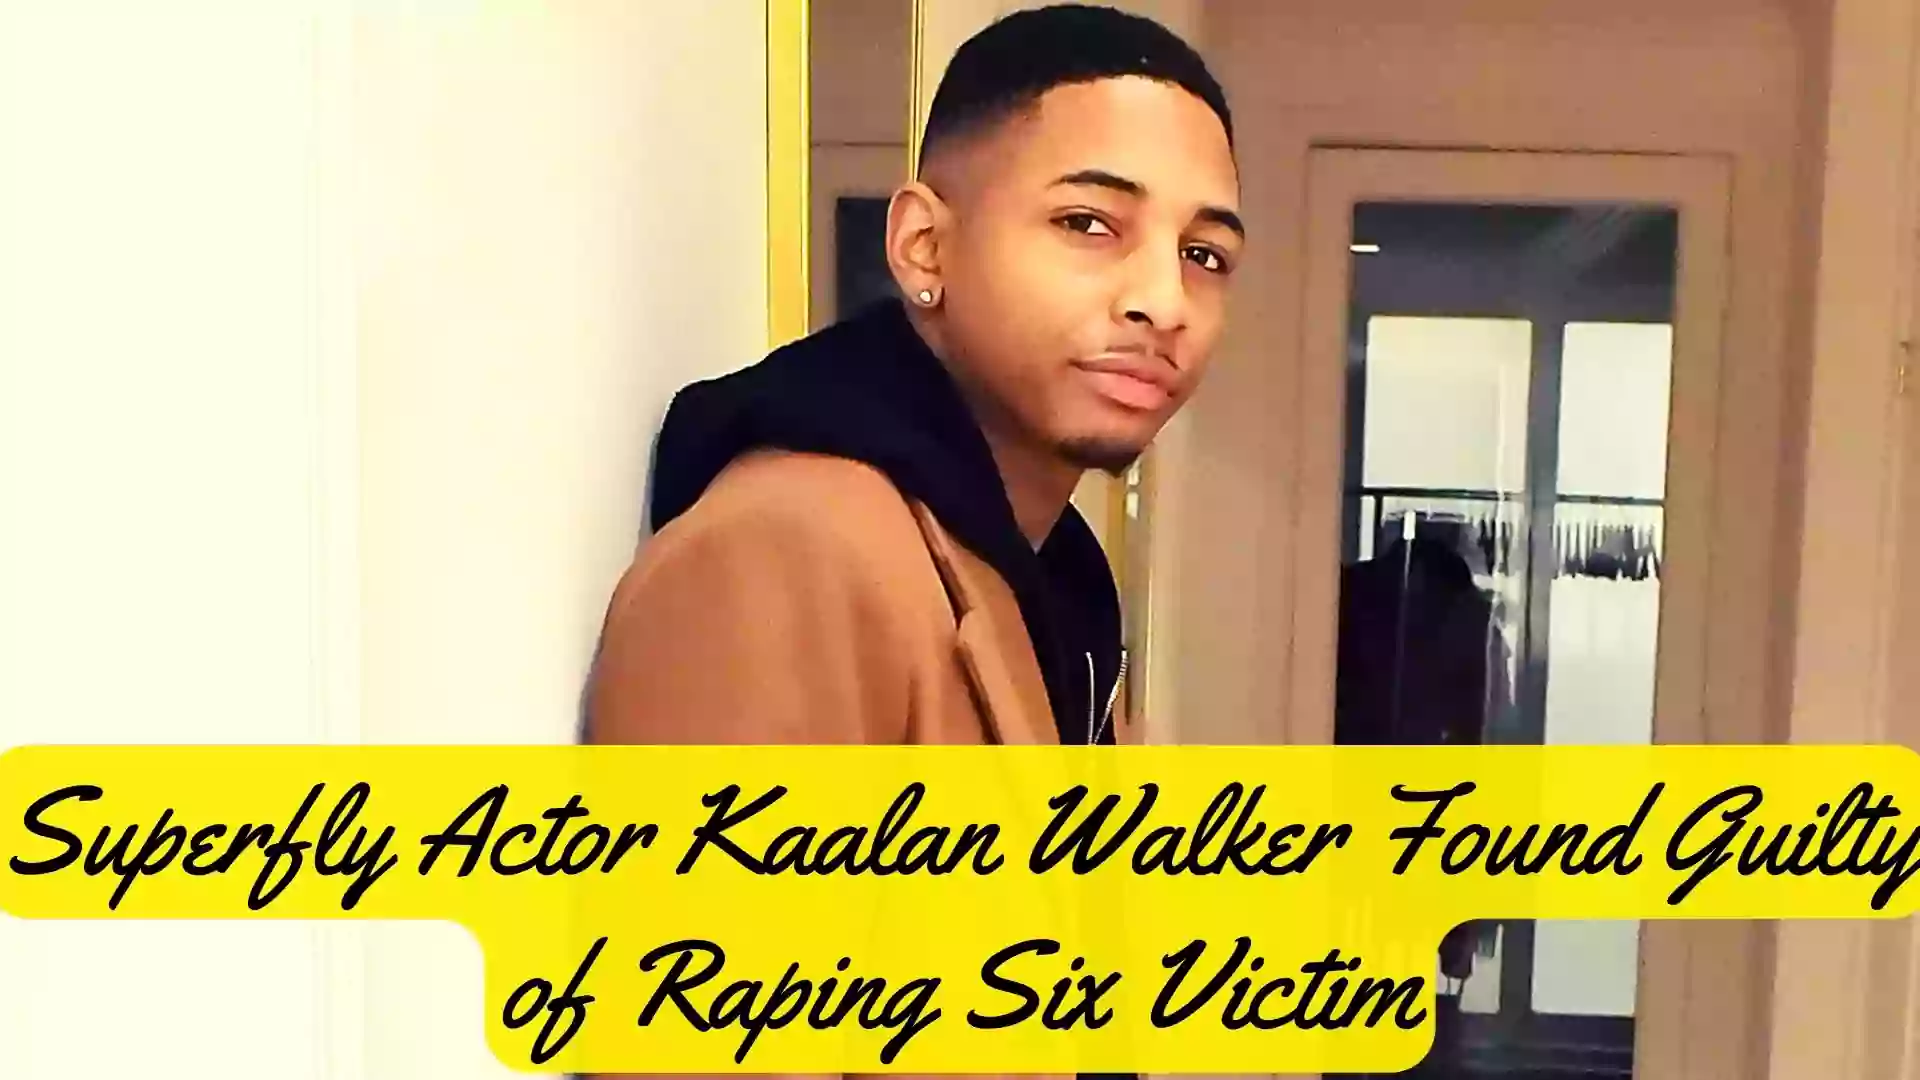 Superfly Actor Kaalan Walker Found Guilty for 6 Rapes